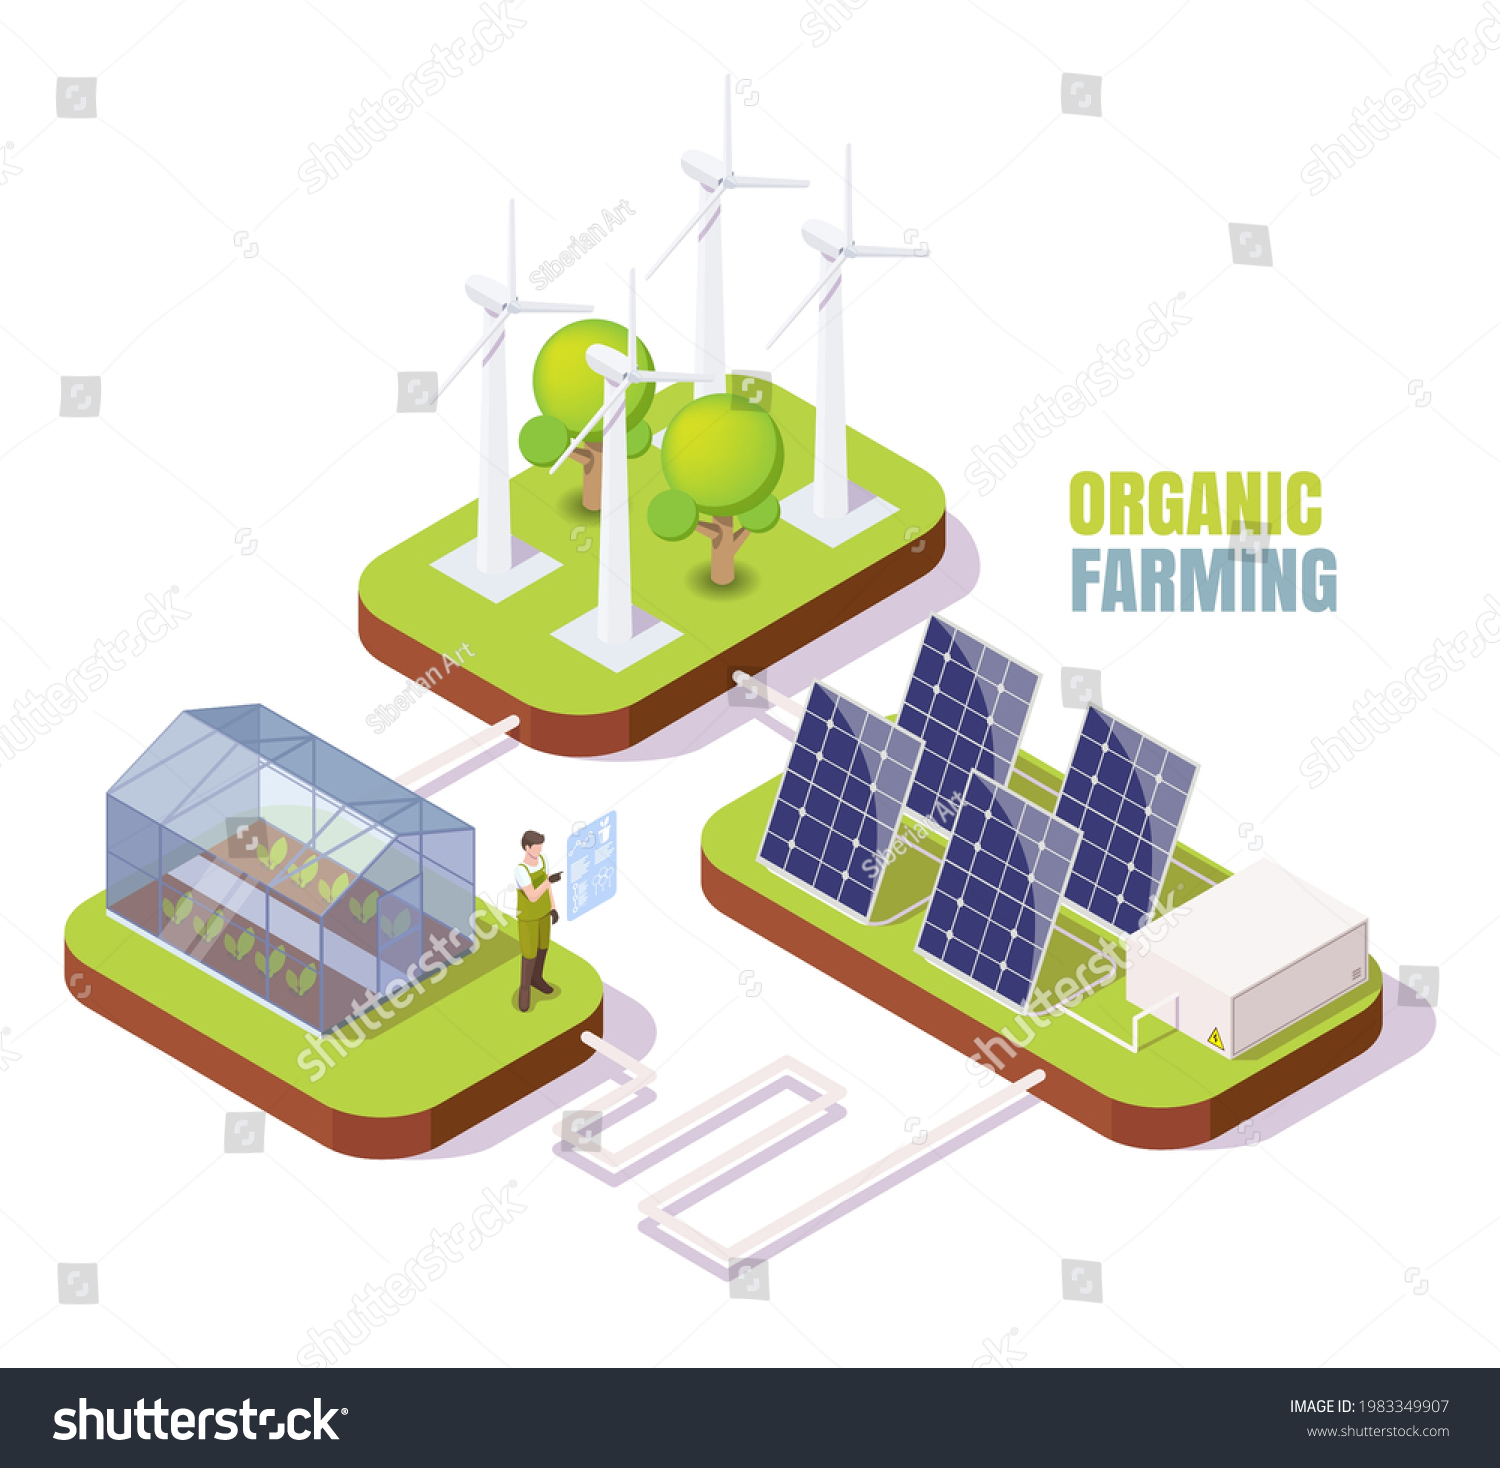 SVG of Organic farming. Greenhouse, wind turbines and solar panels, flat vector isometric illustration. Glasshouse using clean energy from sun and wind. Green alternative energy. Eco farm. svg